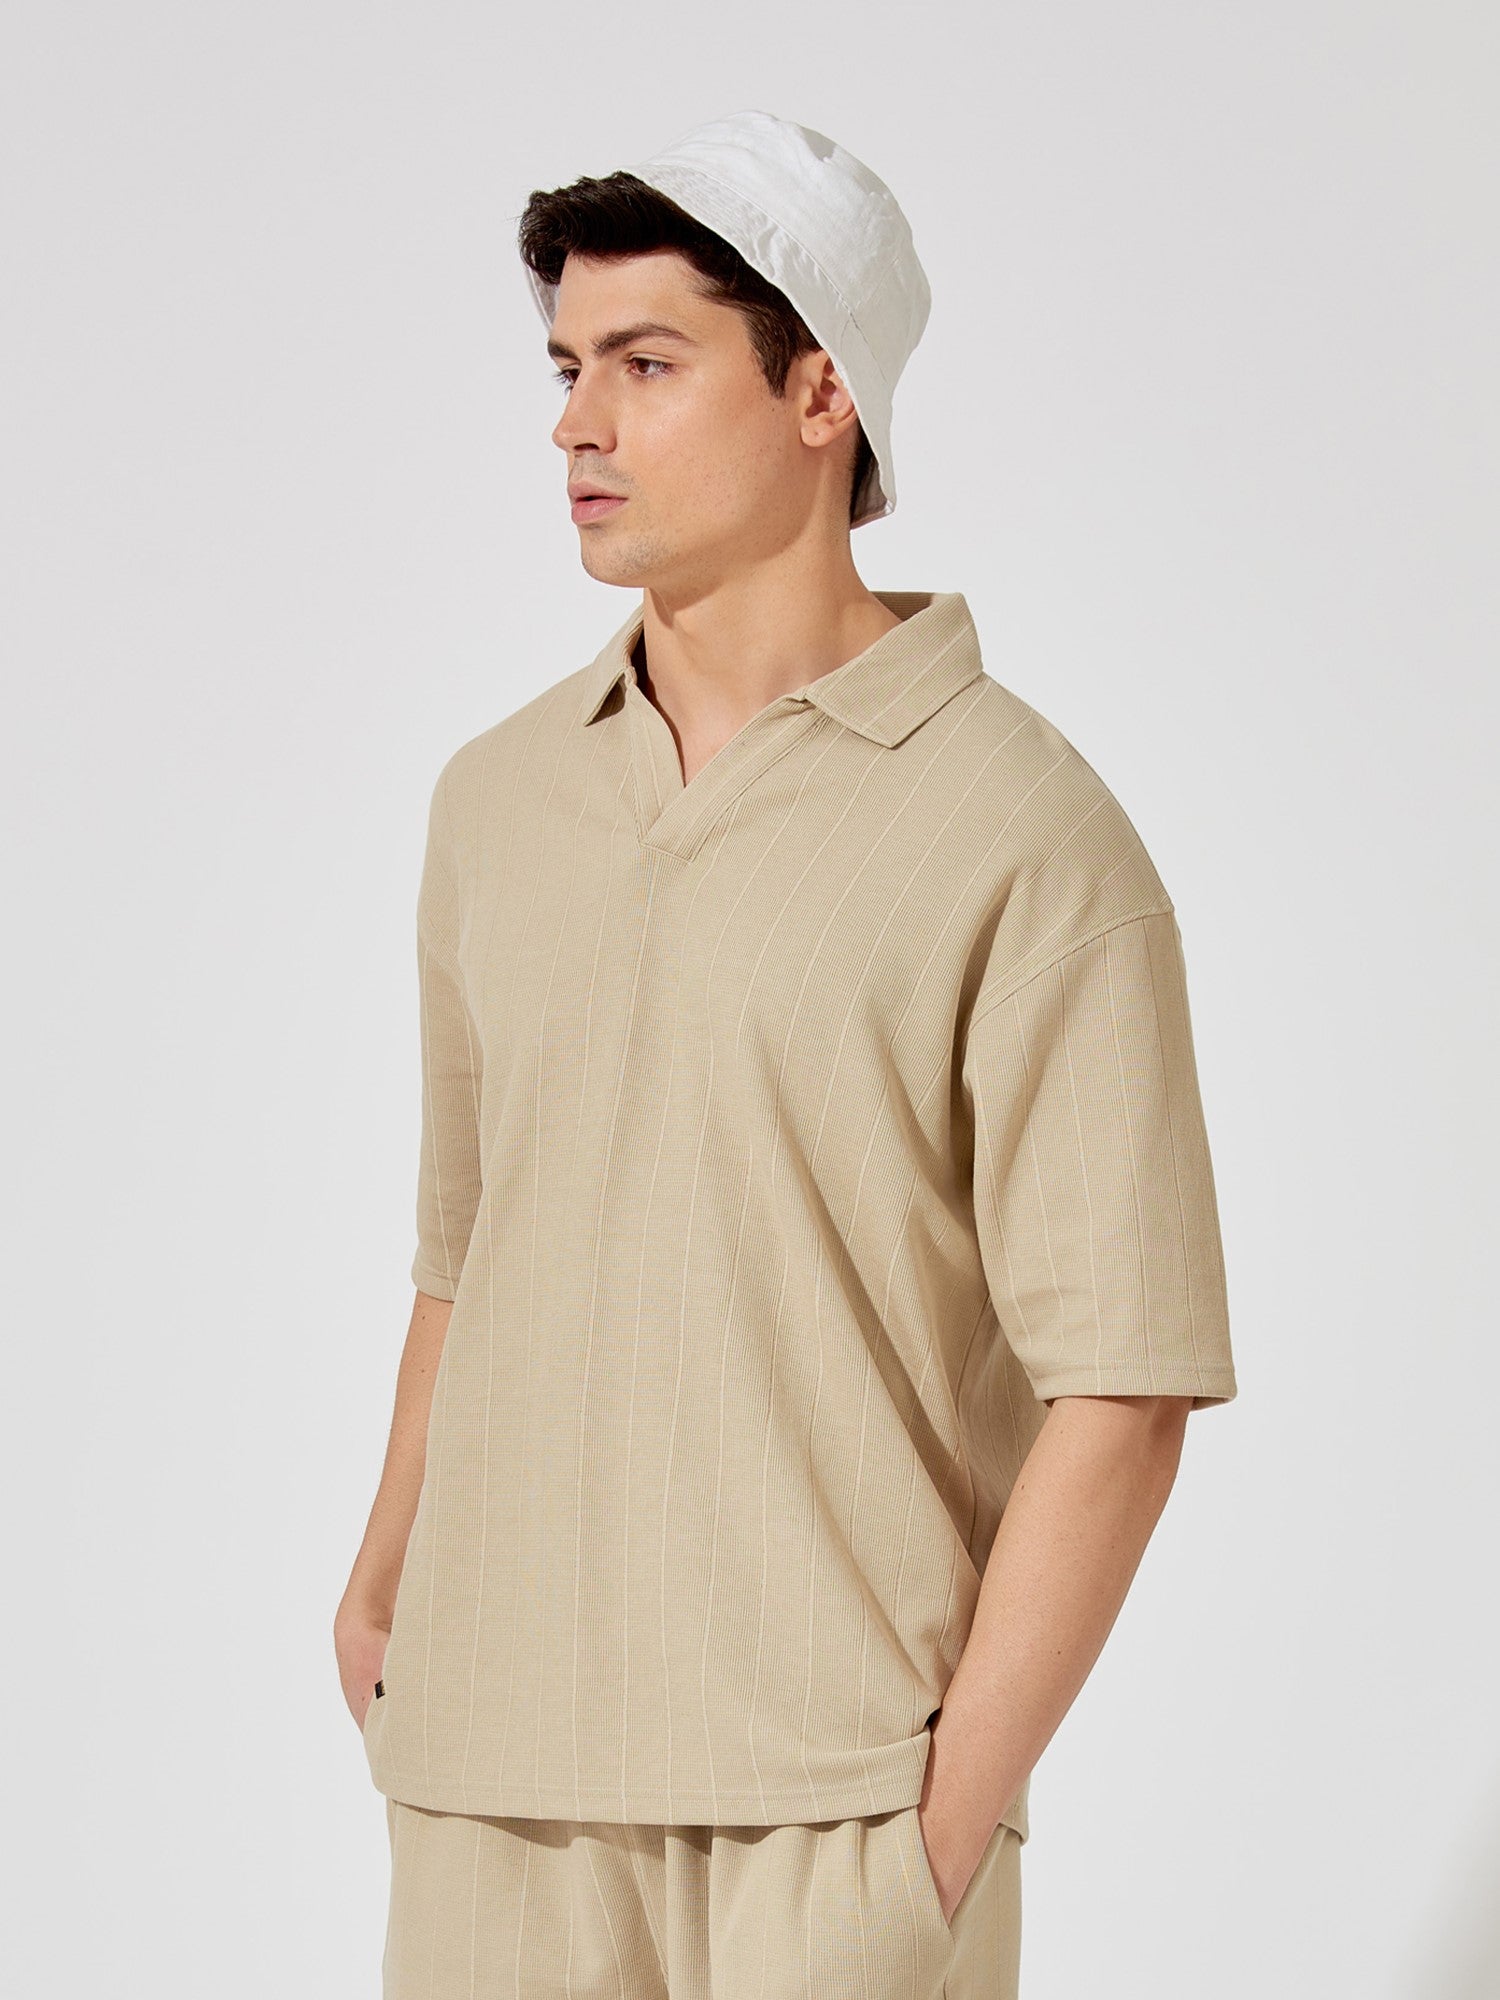 Buy Brooklyn Biscuit Oversized Solid T-Shirtfrom Maniac Life store ...